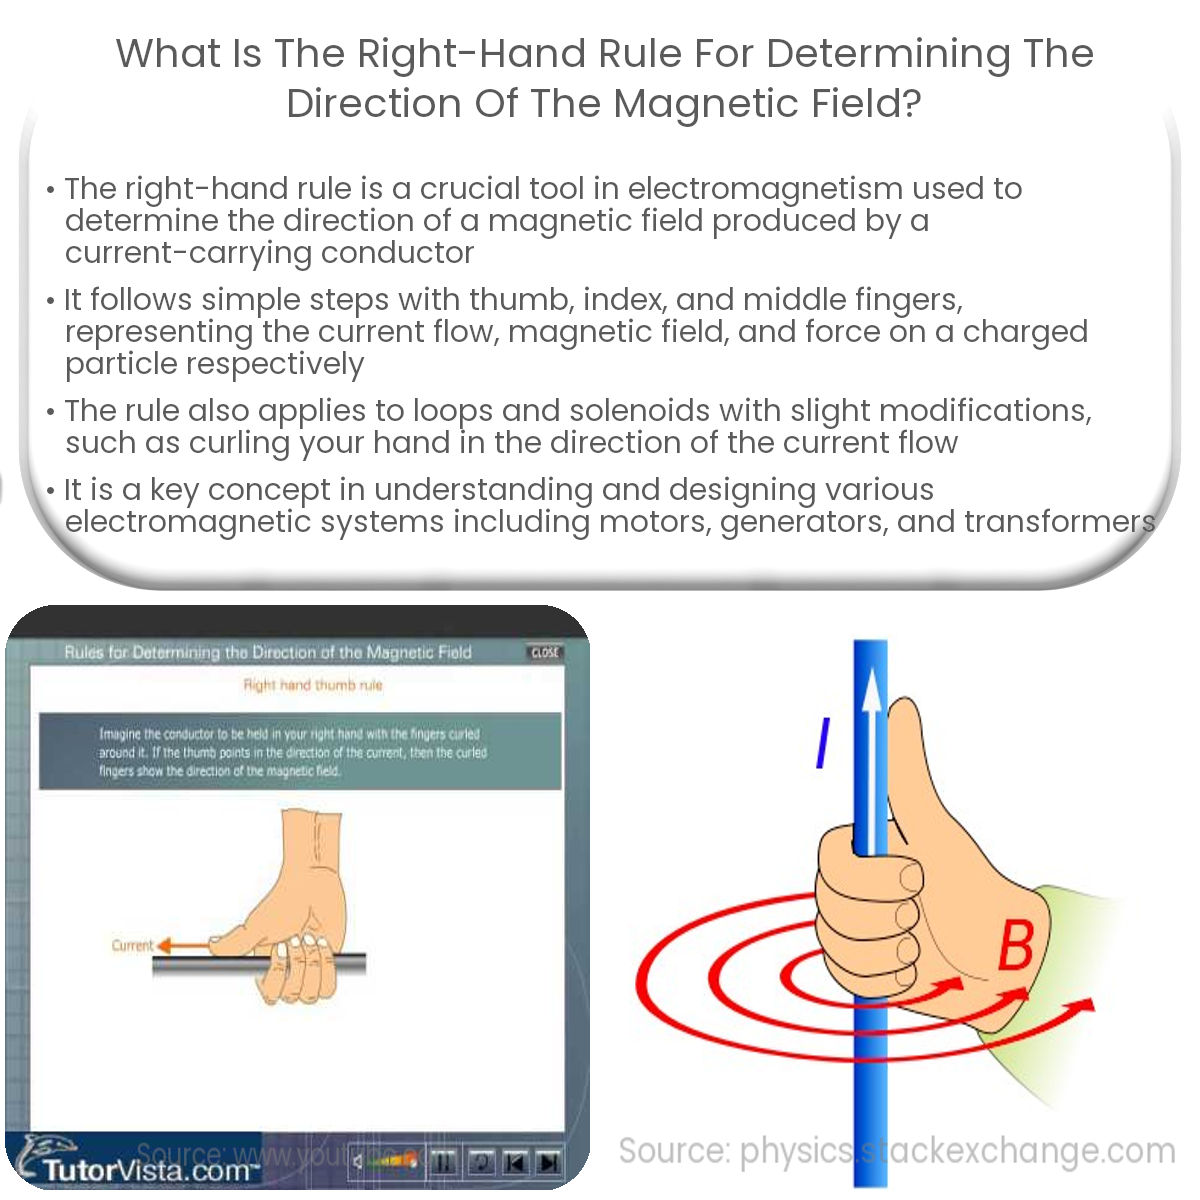 What is the right-hand rule for determining the direction of the magnetic field?